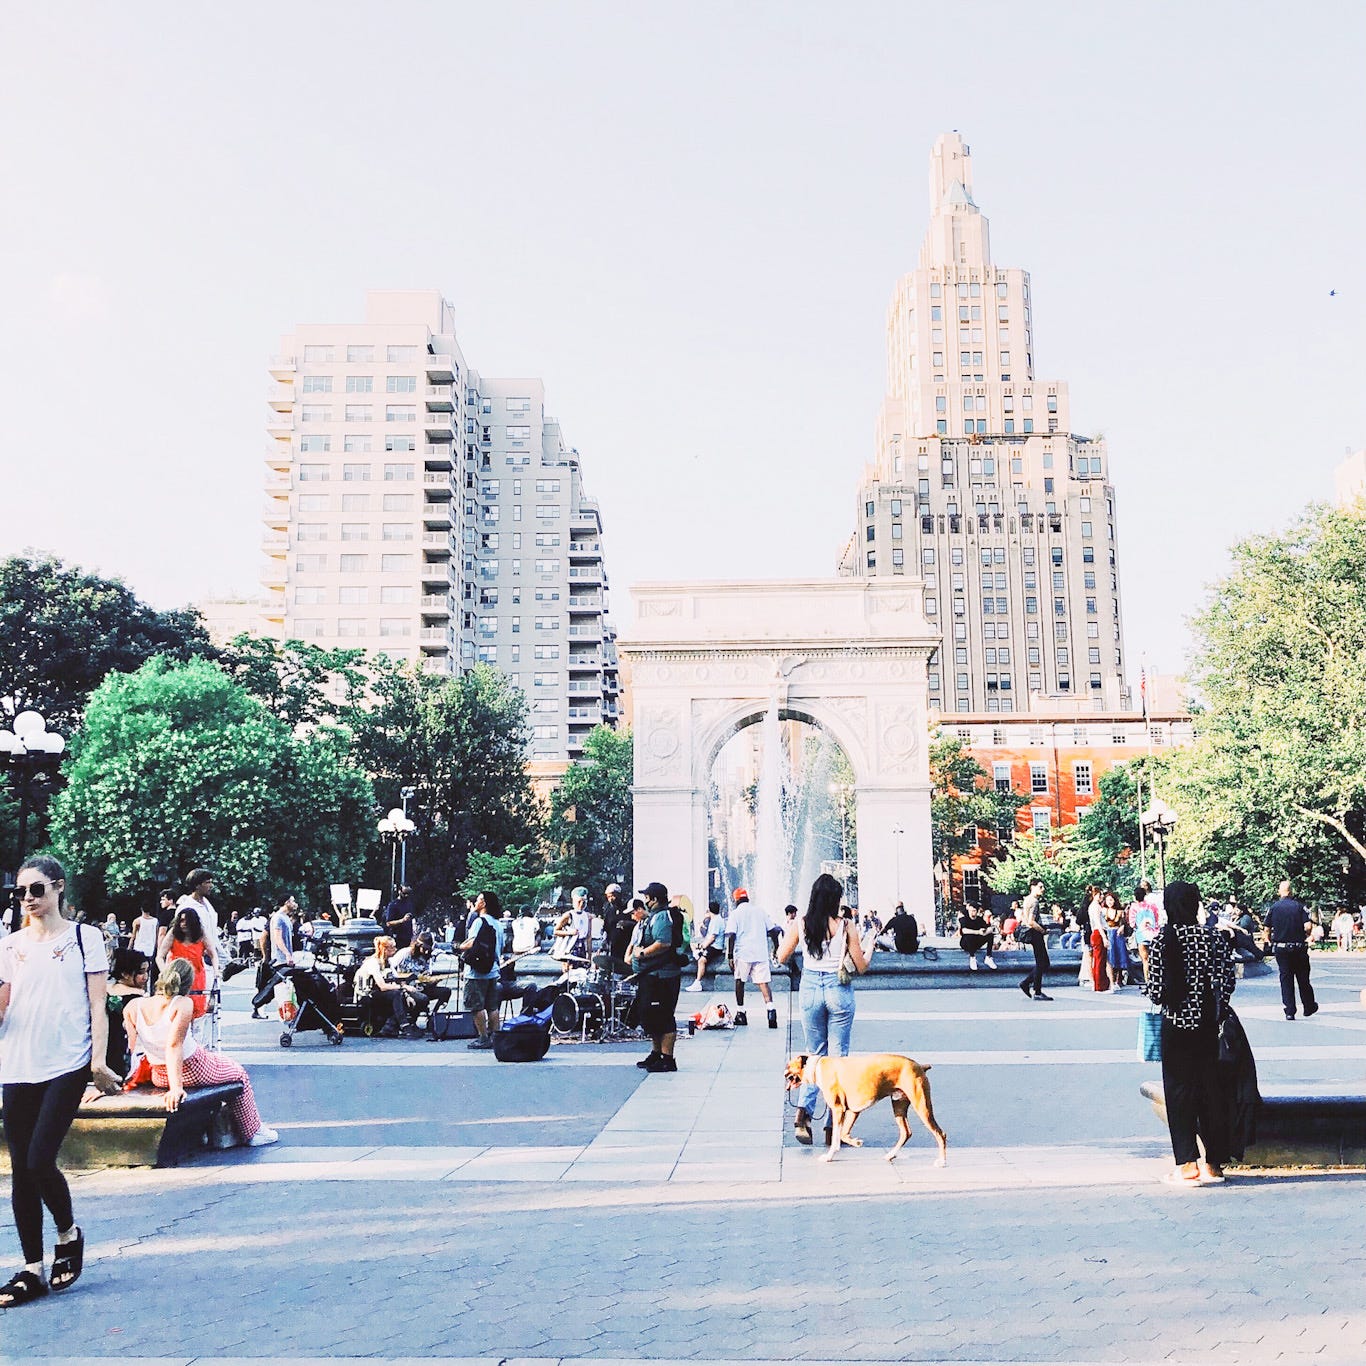 Washington Square Park in the summer